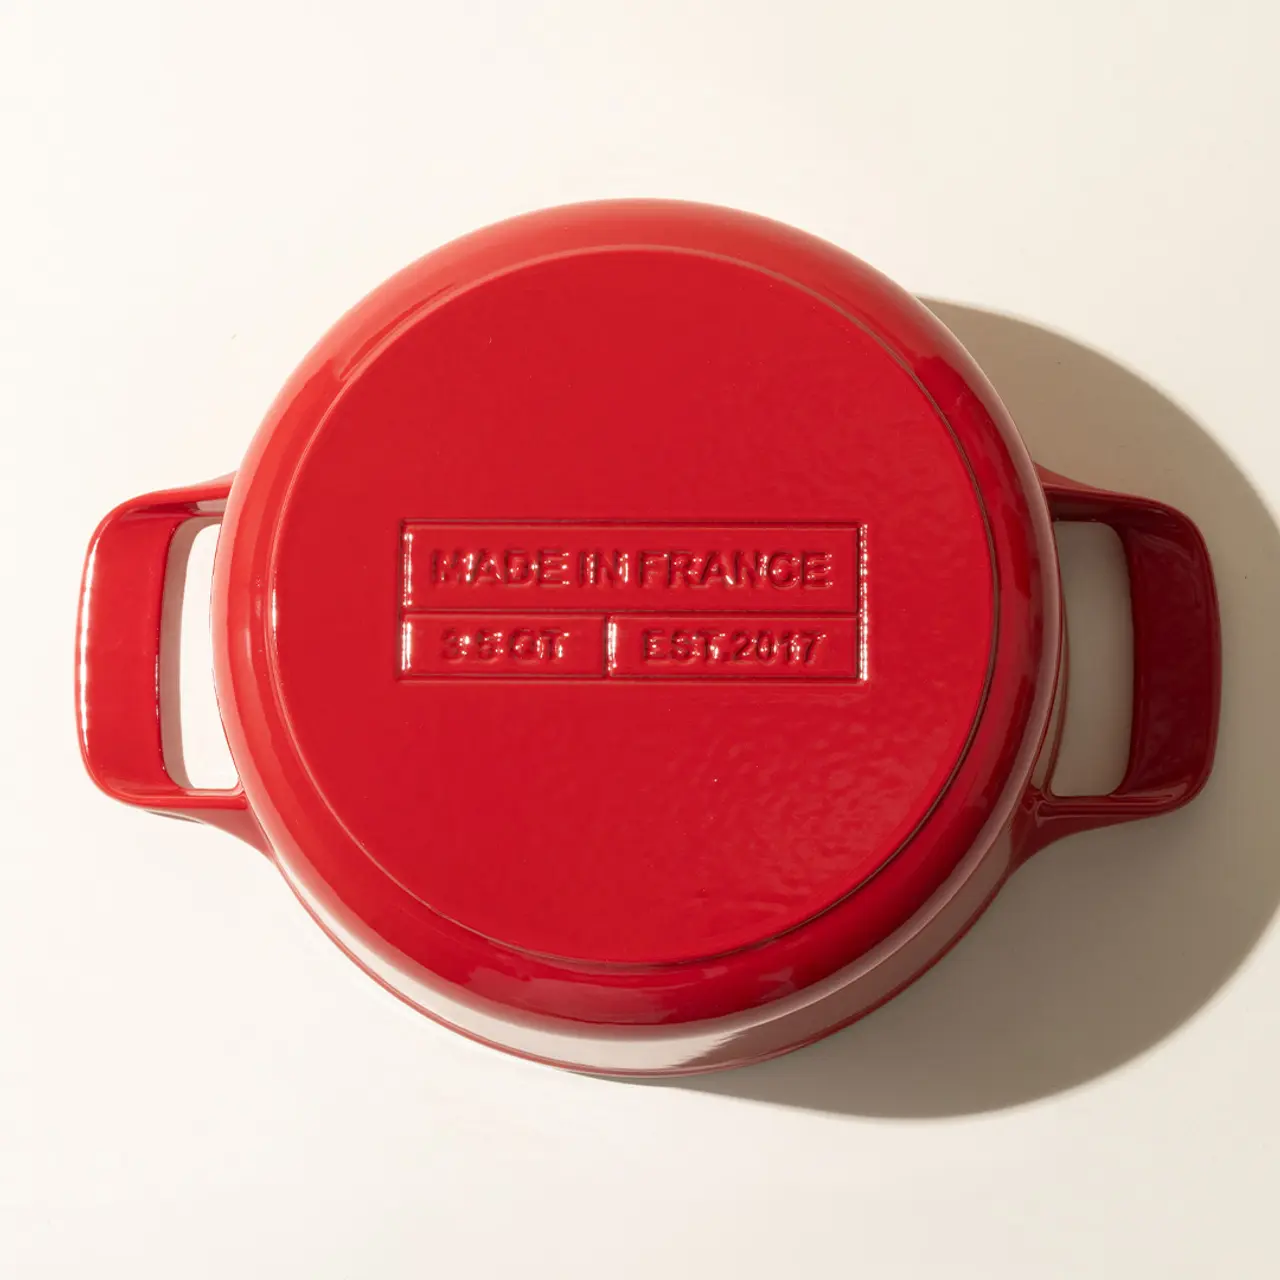 A red enameled cast iron pot with the text "MADE IN FRANCE" embossed on the lid, indicating its country of manufacture.